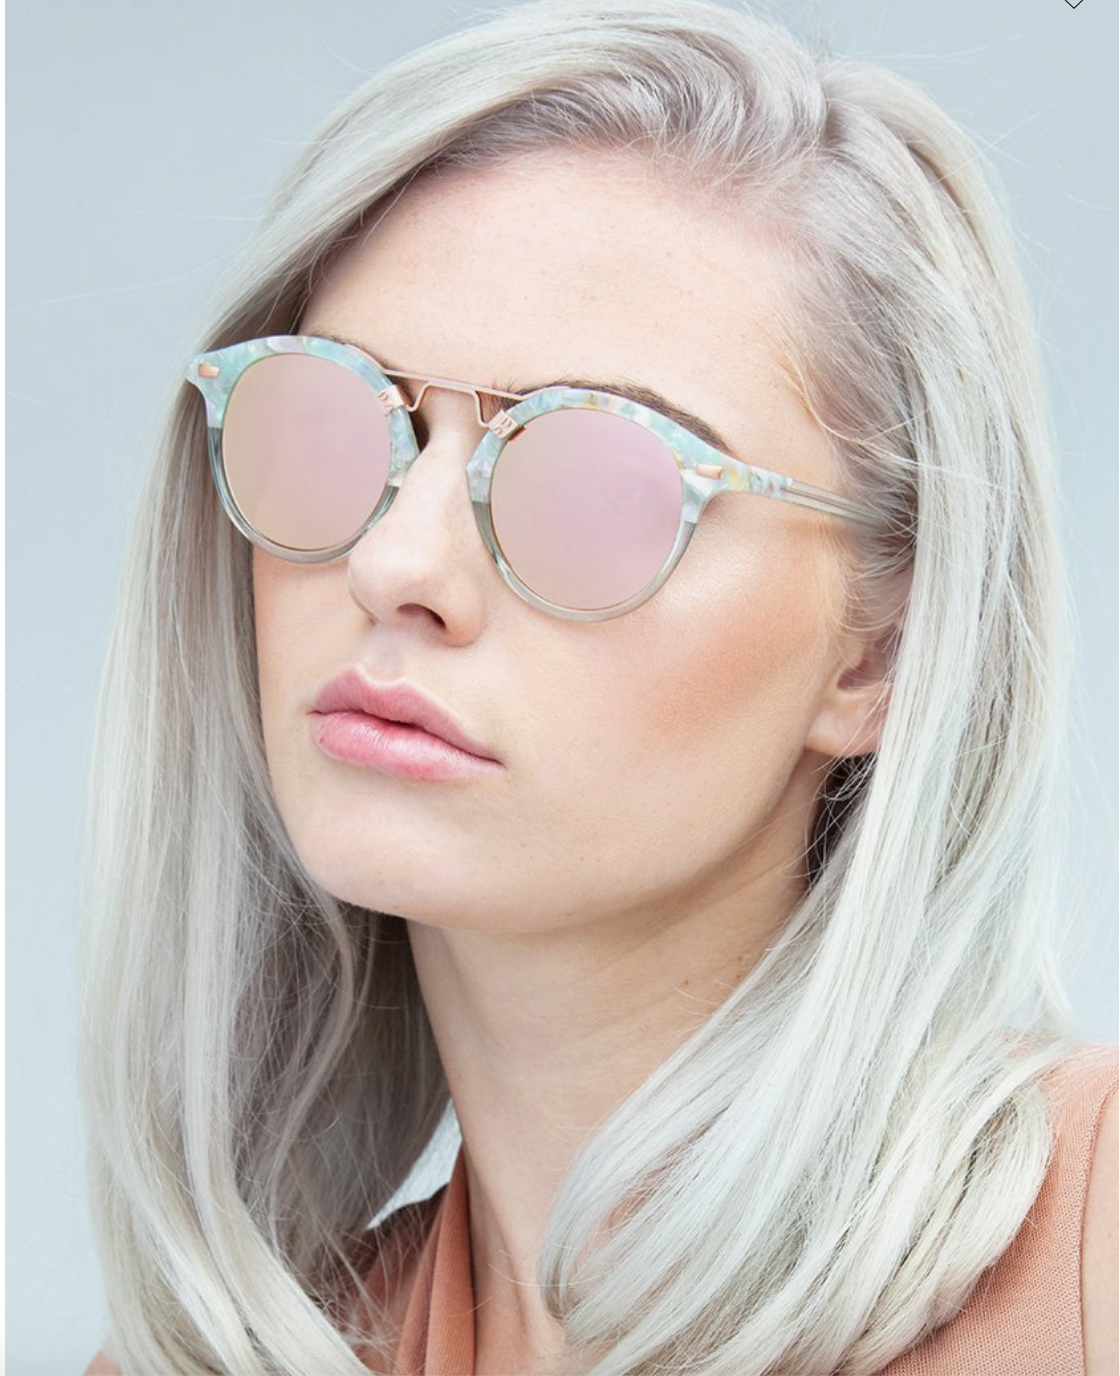 St. Louis Classics Sunglasses in Seaglass to Opal 24K